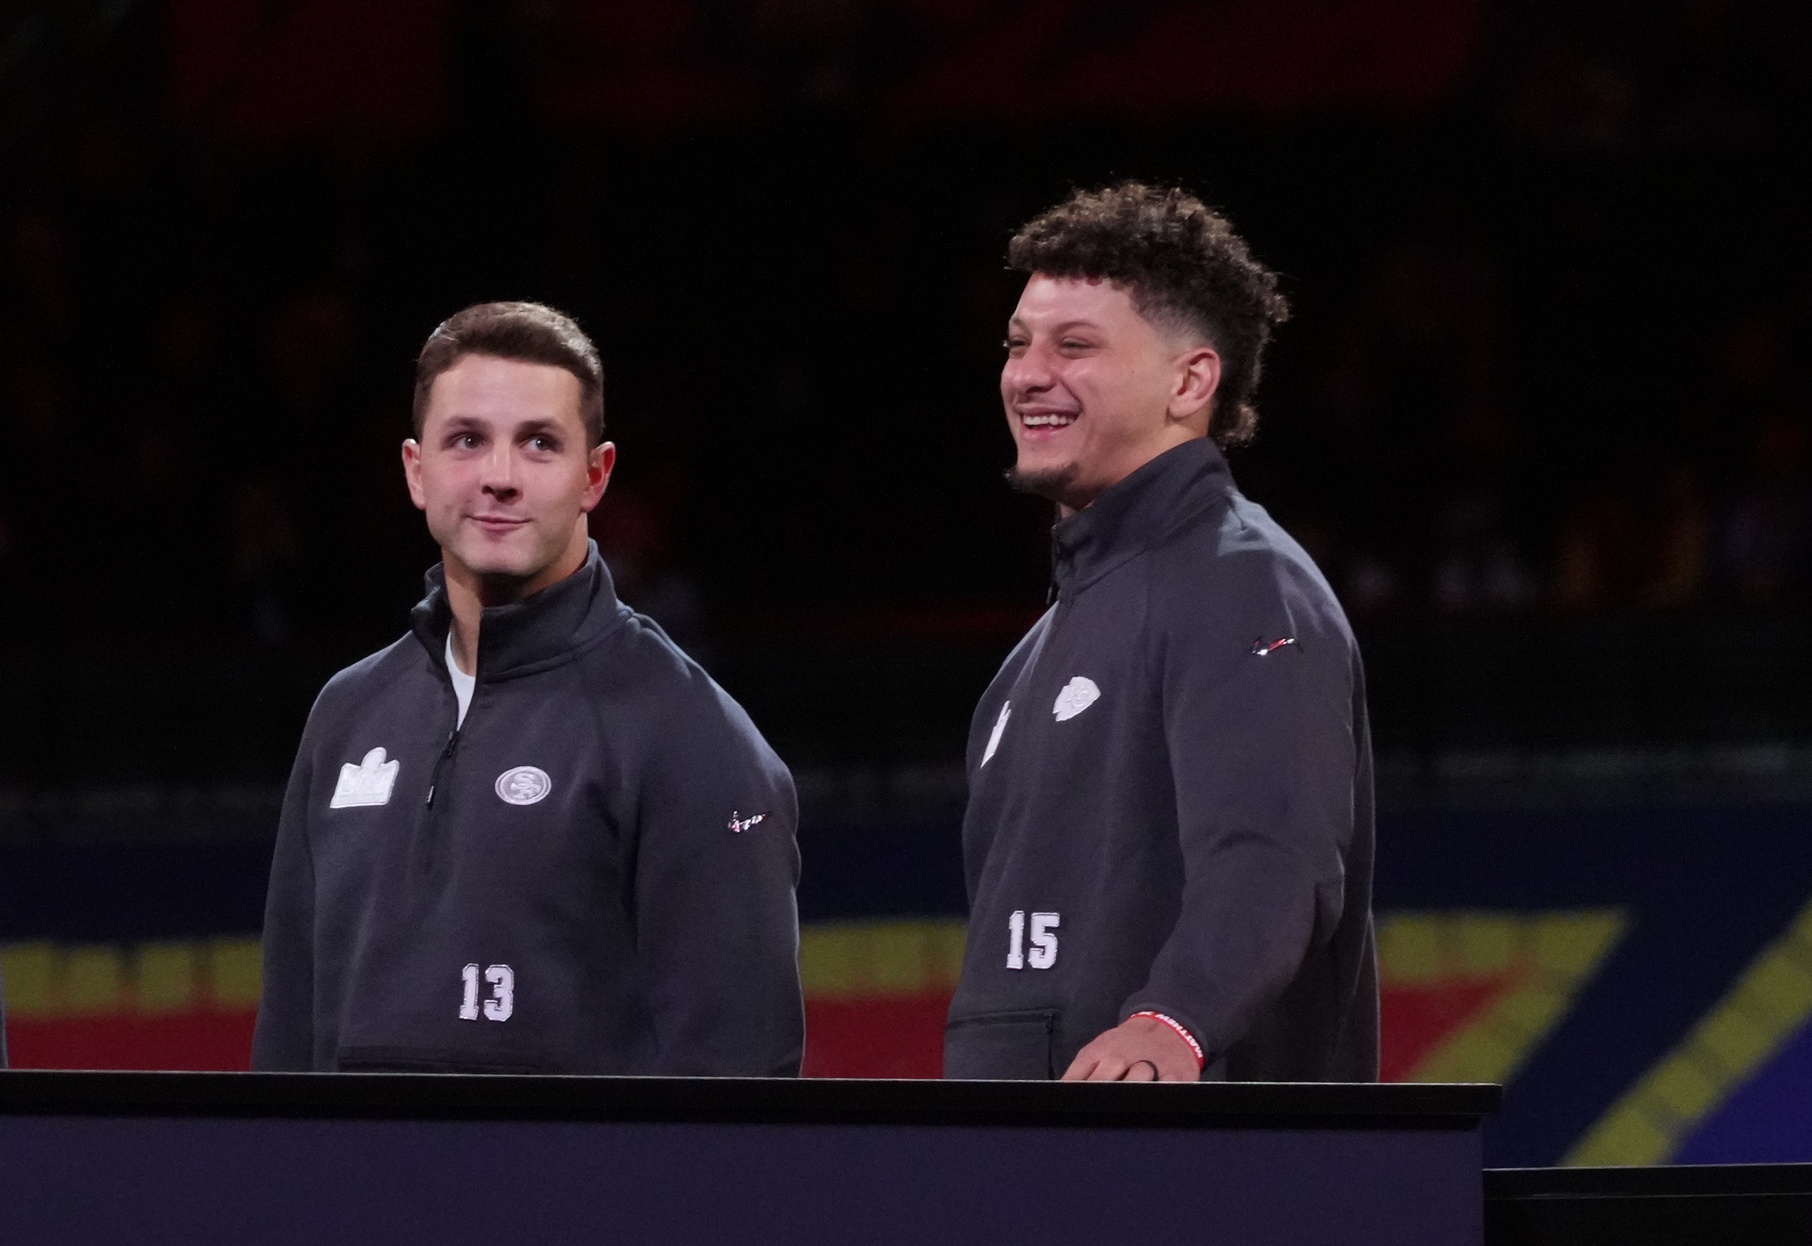 San Francisco 49ers quarterback Brock Purdy (13) and Kansas City Chiefs quarterback Patrick Mahomes (15) stand on stage together during Super Bowl LVIII Opening Night at Allegiant Stadium.